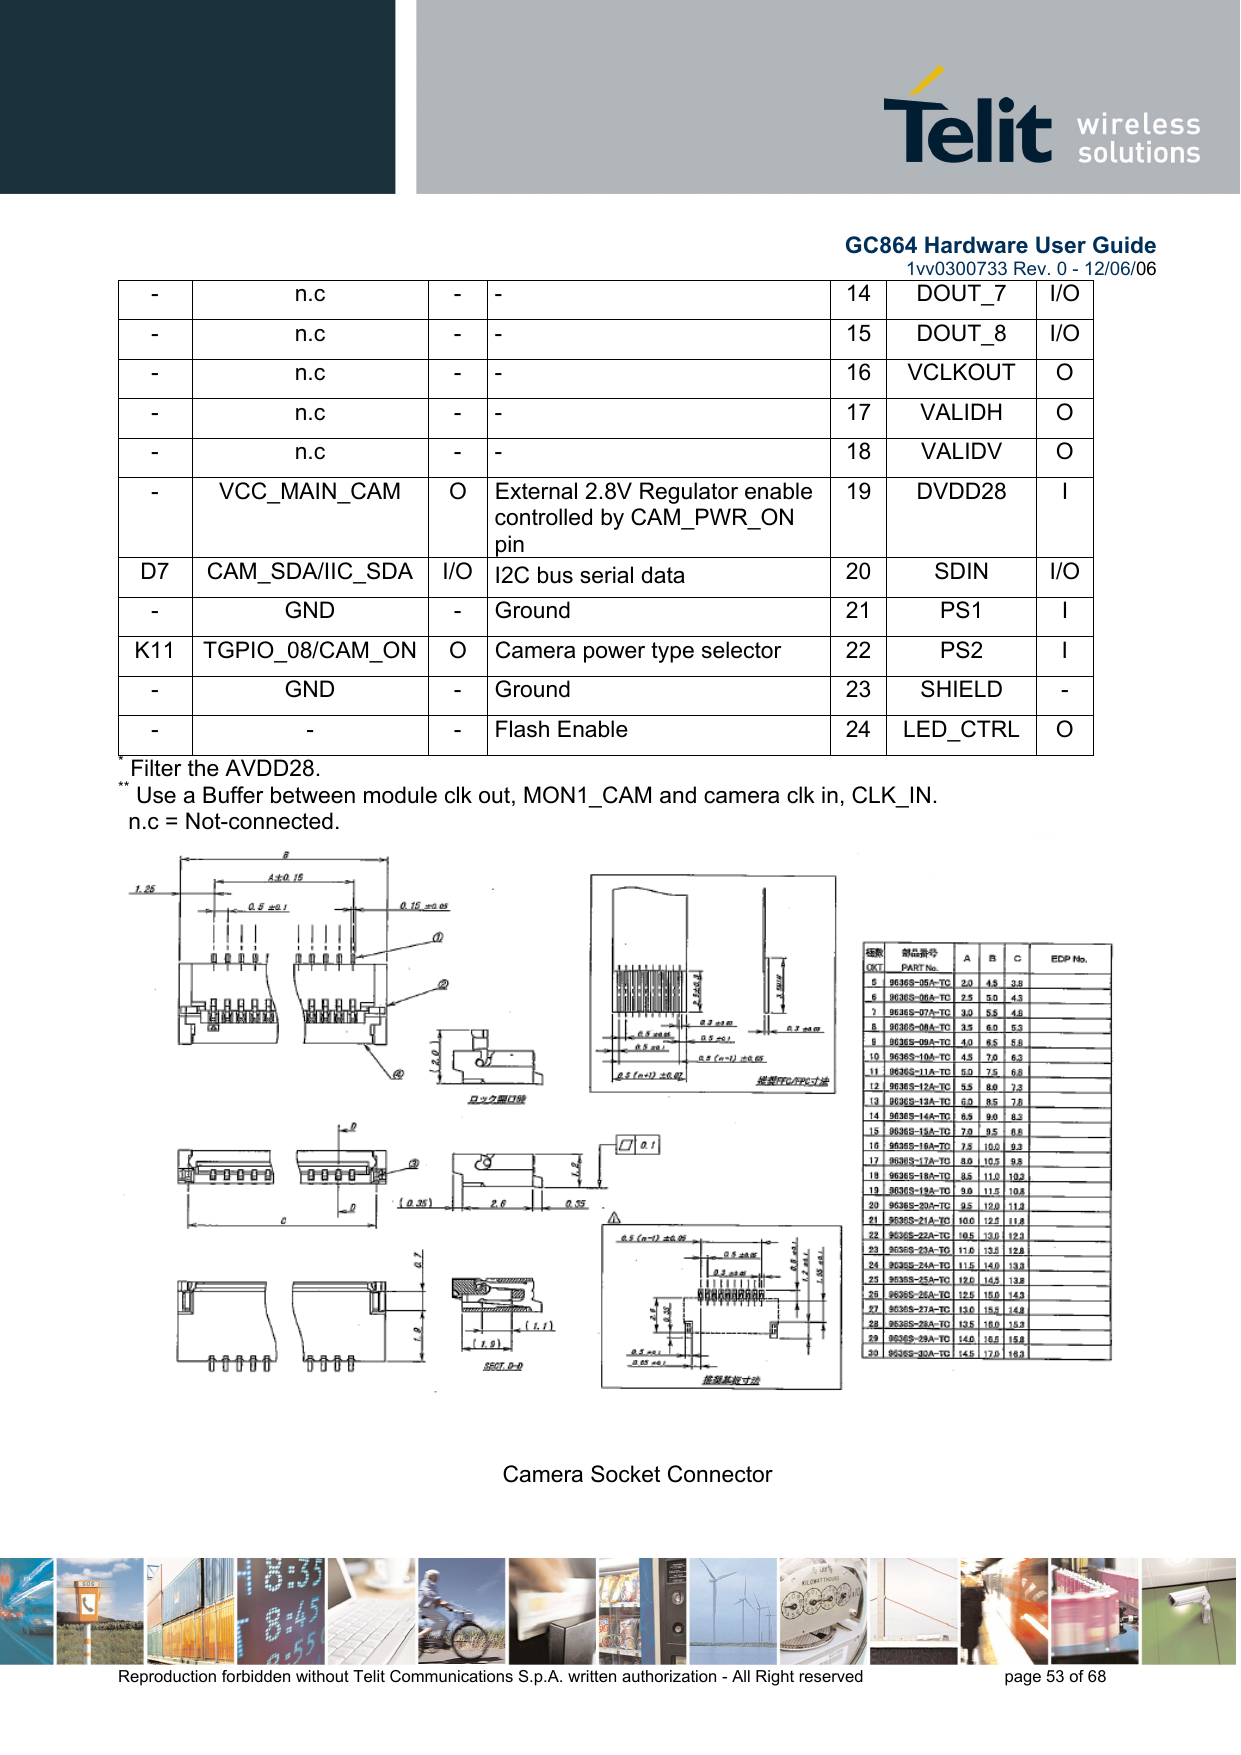        GC864 Hardware User Guide  1vv0300733 Rev. 0 - 12/06/06  Reproduction forbidden without Telit Communications S.p.A. written authorization - All Right reserved    page 53 of 68  - n.c - -  14 DOUT_7 I/O- n.c - -  15 DOUT_8 I/O- n.c - -  16 VCLKOUT O - n.c - -  17 VALIDH O - n.c - -  18 VALIDV O -  VCC_MAIN_CAM  O  External 2.8V Regulator enable controlled by CAM_PWR_ON pin 19 DVDD28  I D7 CAM_SDA/IIC_SDA I/O I2C bus serial data  20 SDIN I/O- GND - Ground  21 PS1 I K11  TGPIO_08/CAM_ON  O  Camera power type selector  22  PS2  I - GND - Ground  23 SHIELD - - - - Flash Enable  24 LED_CTRL O * Filter the AVDD28. ** Use a Buffer between module clk out, MON1_CAM and camera clk in, CLK_IN.   n.c = Not-connected.             Camera Socket Connector 11.1.2  11.1.3  11.1.4    Camera Socket Connector 